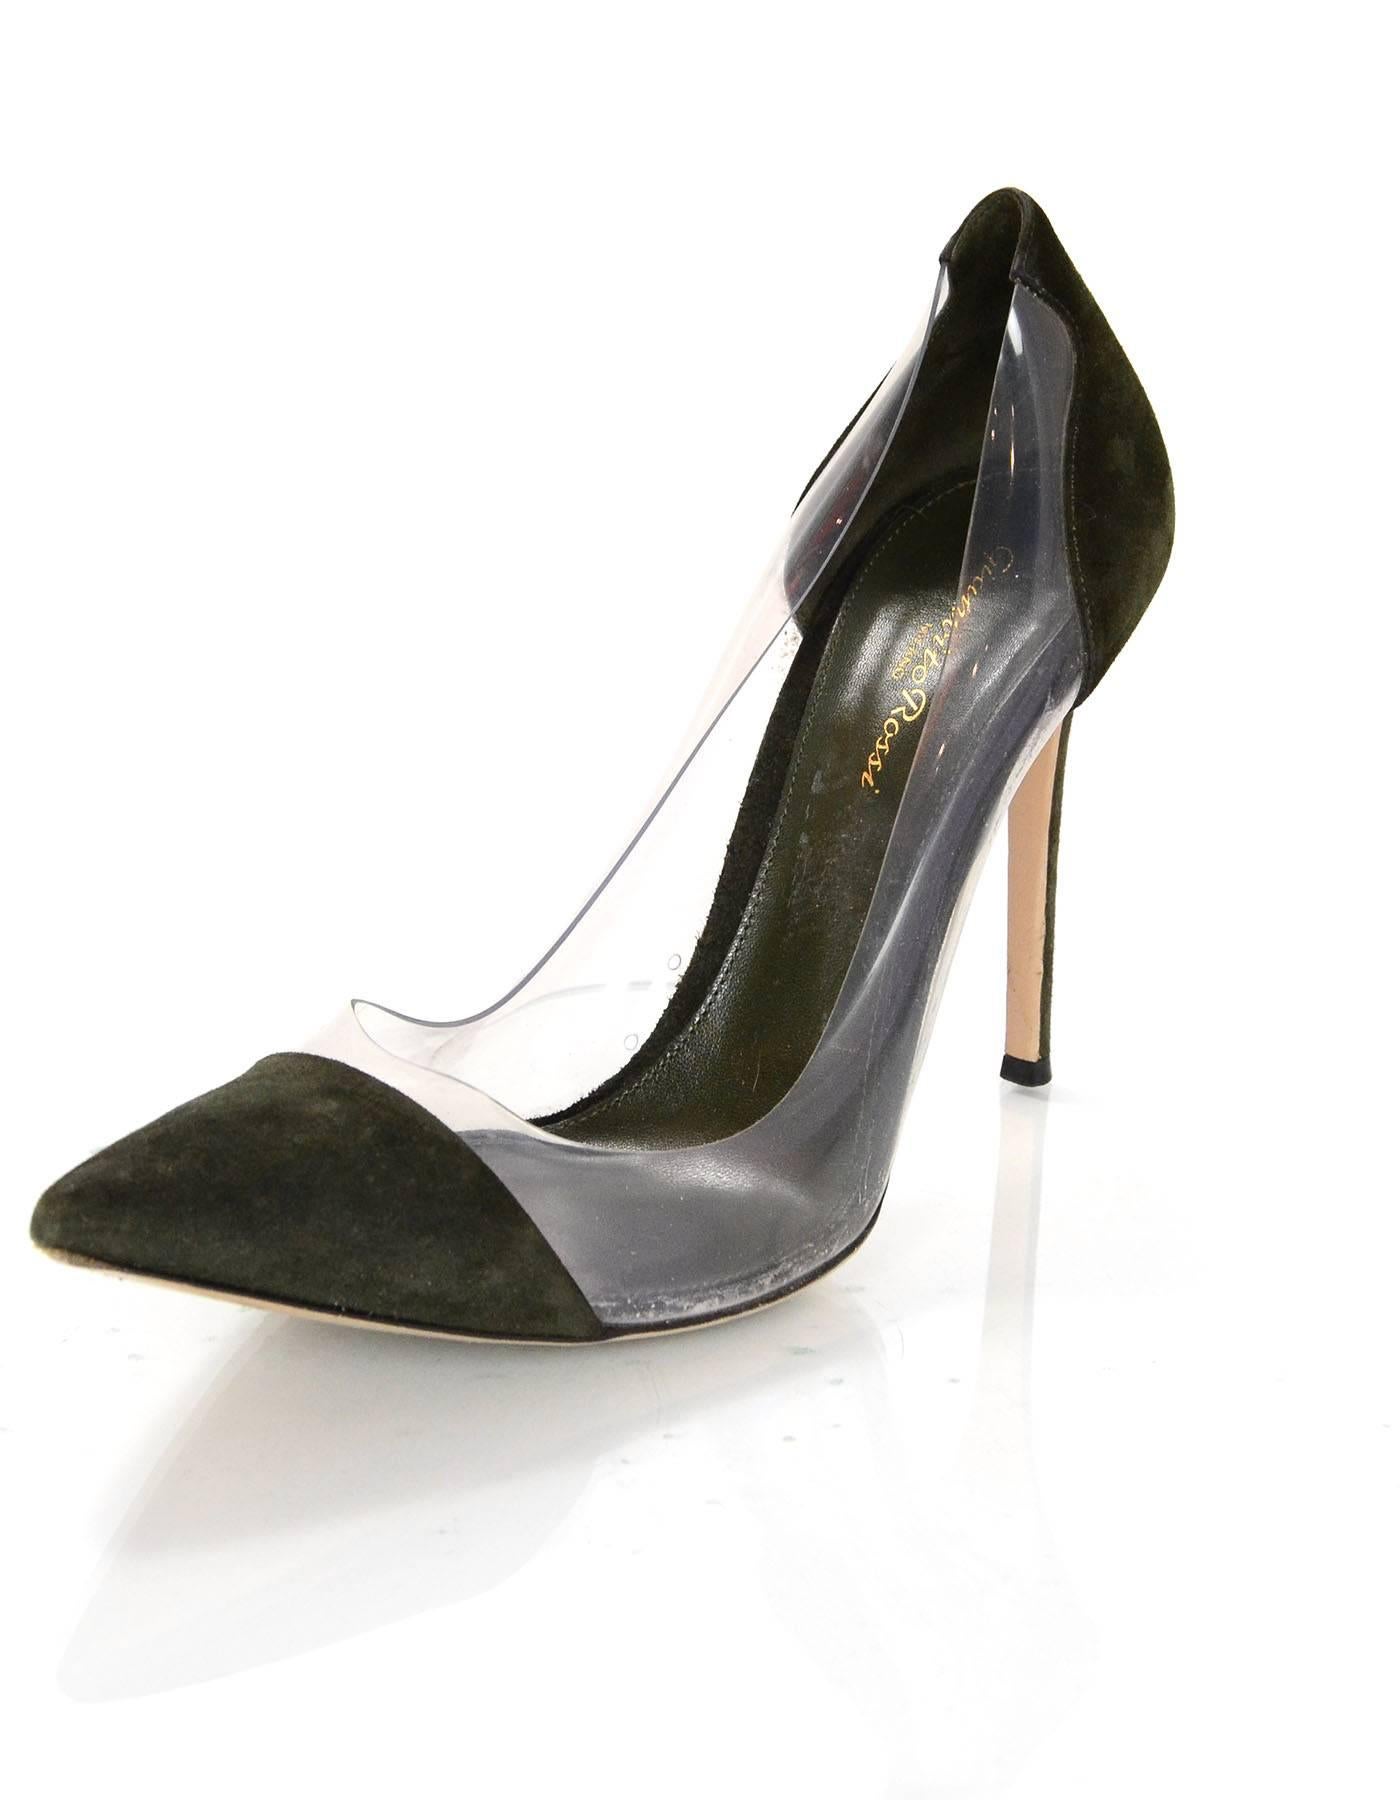 Gianvito Rossi Olive Green Suede and PVC Pumps Sz 41

Made In: Italy
Materials: Suede, PVC
Closure/Opening: Slide on
Retail Price: $795 + tax
Sole Stamp: Gianvito Rossi Paris Made In Italy 41
Overall Condition: Good pre-owned condition - wear at